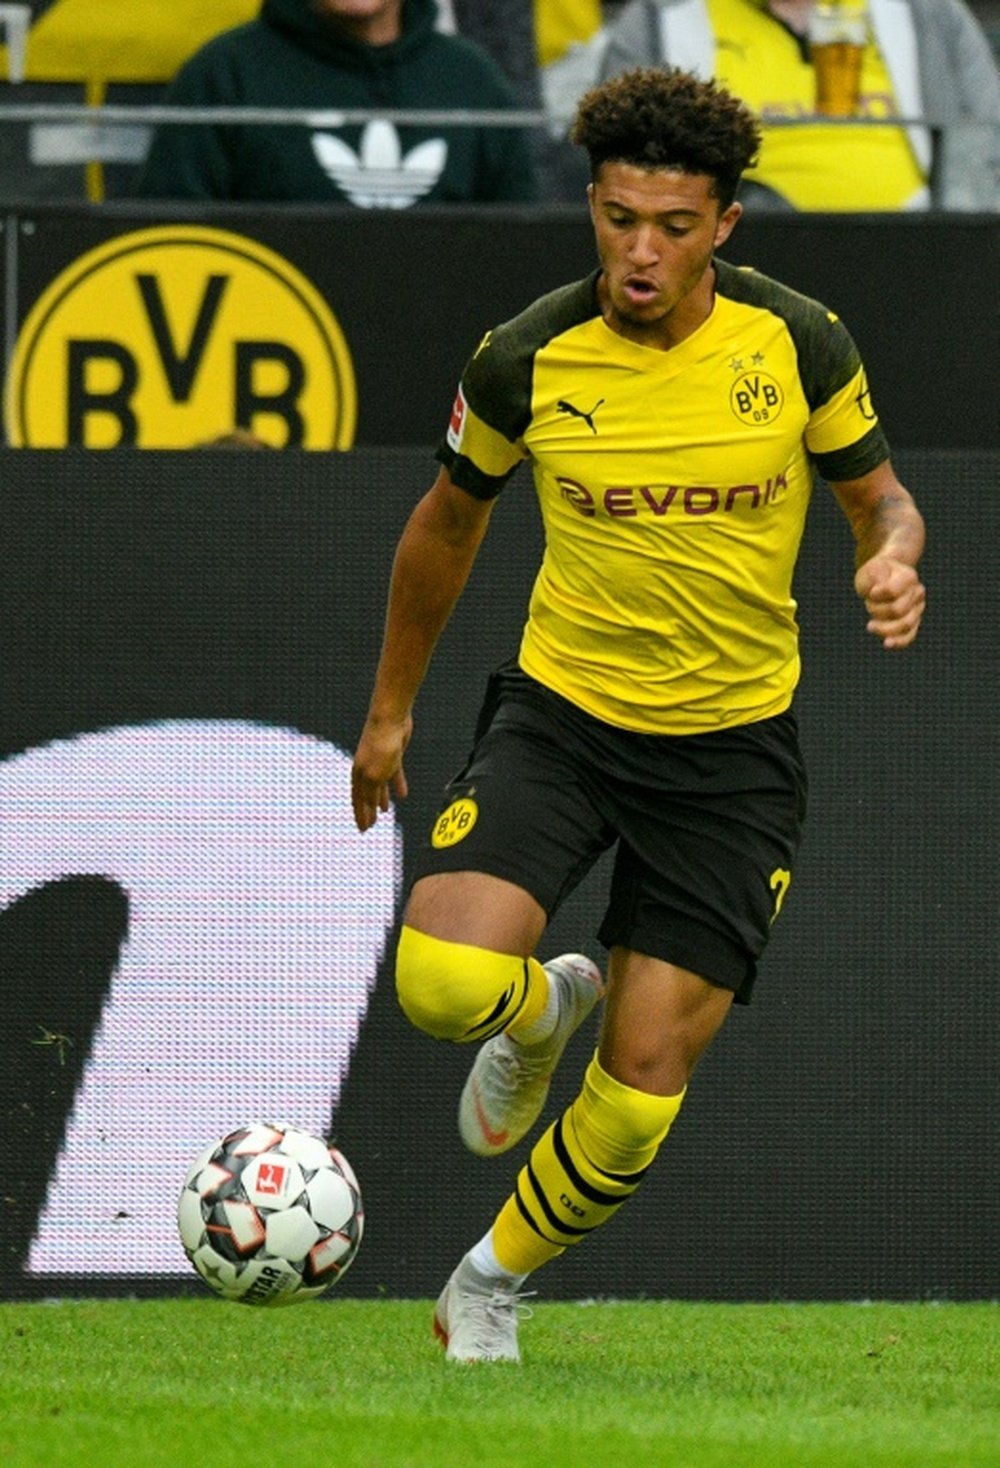 Jadon Sancho is among a small group of english talents with bright futures in the game. AFP